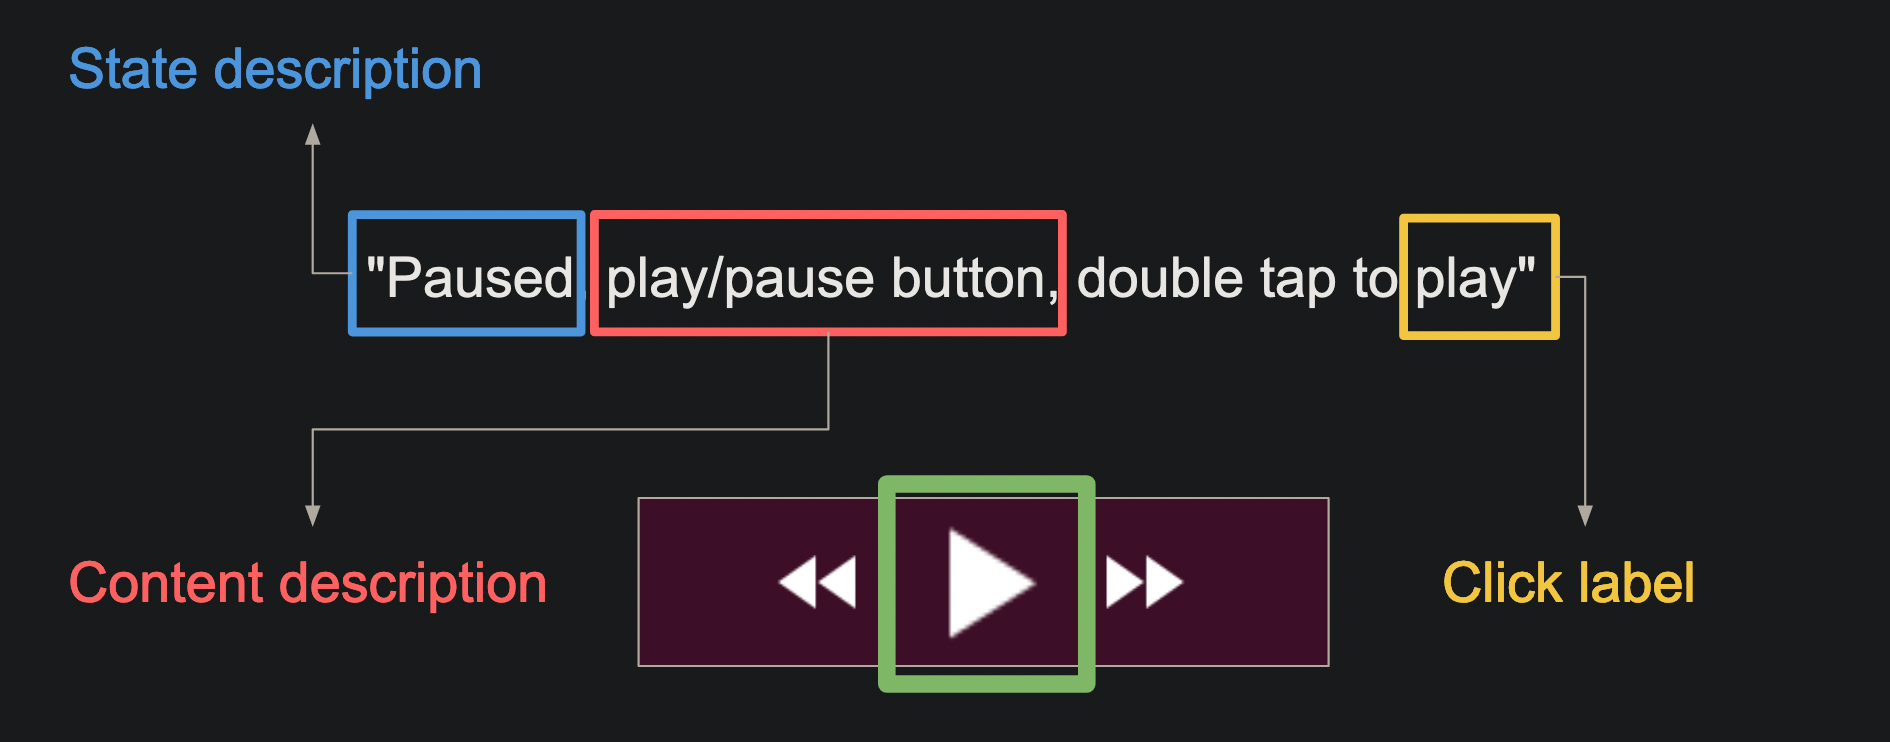 Image showing media controls and the text “Paused, play/pause button, double tap to play”. “Paused” is highlighted as the state description and “play/pause button” is highlighted as the content description and “play” in “double tap to play” is highlighted as the click label